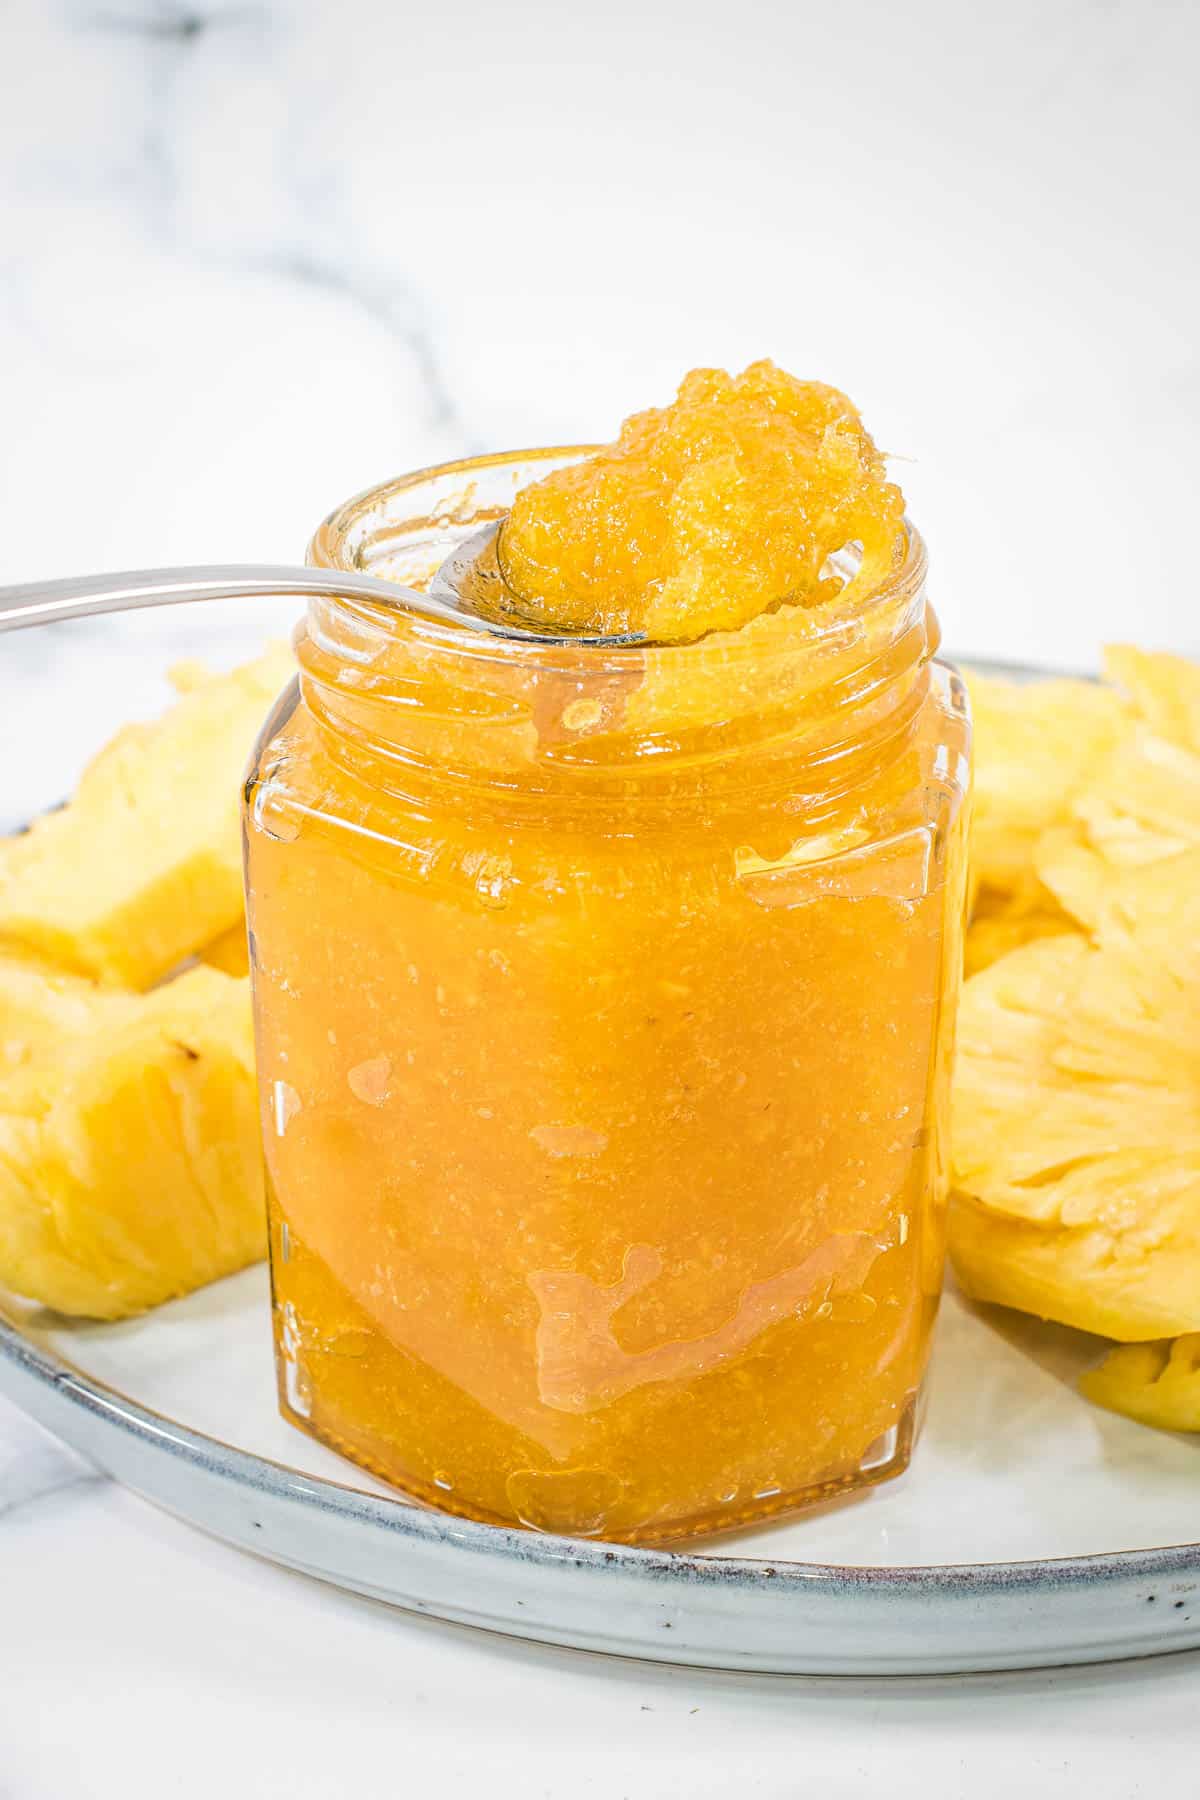 Pineapple jam in a spoon over a glass jar of jam.